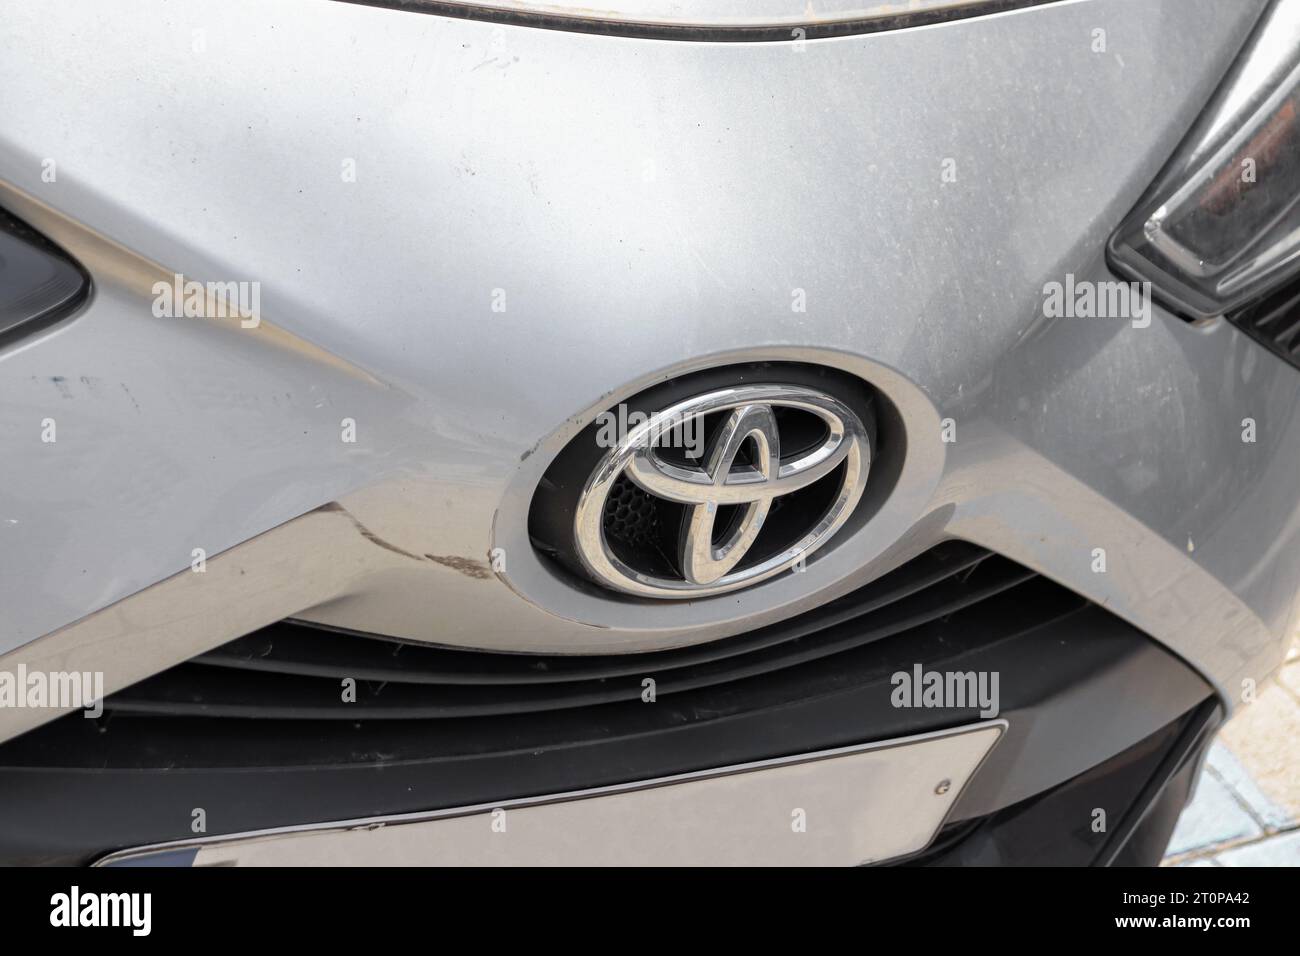 TOYOTA logo on front hood of silver car Stock Photo